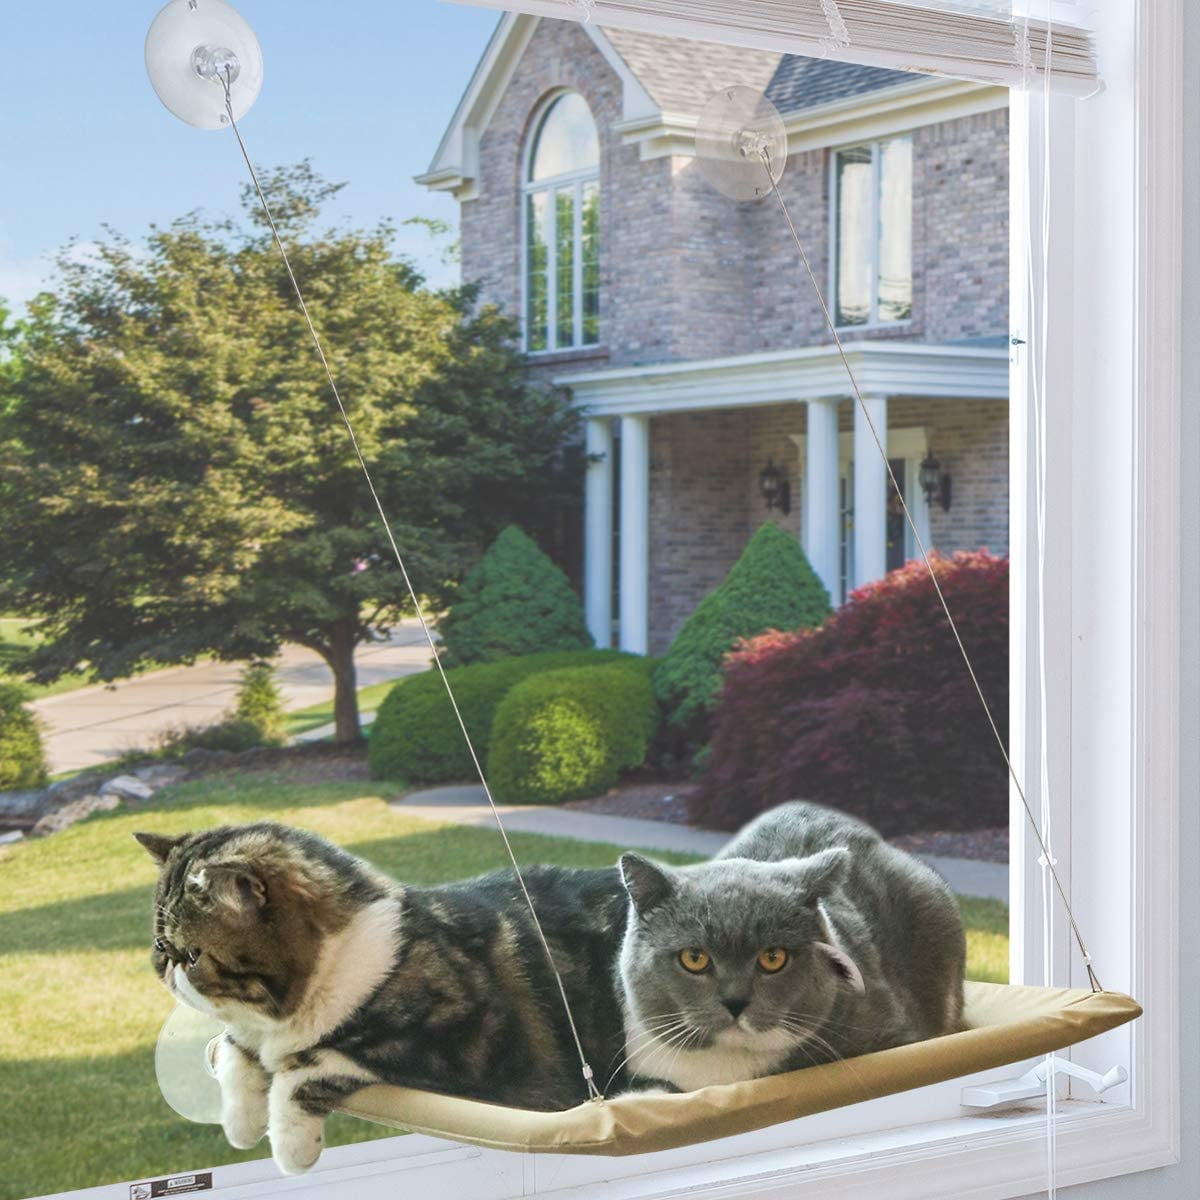 MEWOOFUN Cat Window Perch Cat Window Hammock Cat Bed with Strong Suction Cups Space Saving Cat Seat Providing All-Around Sunbath Holds Up to 30 lbs 